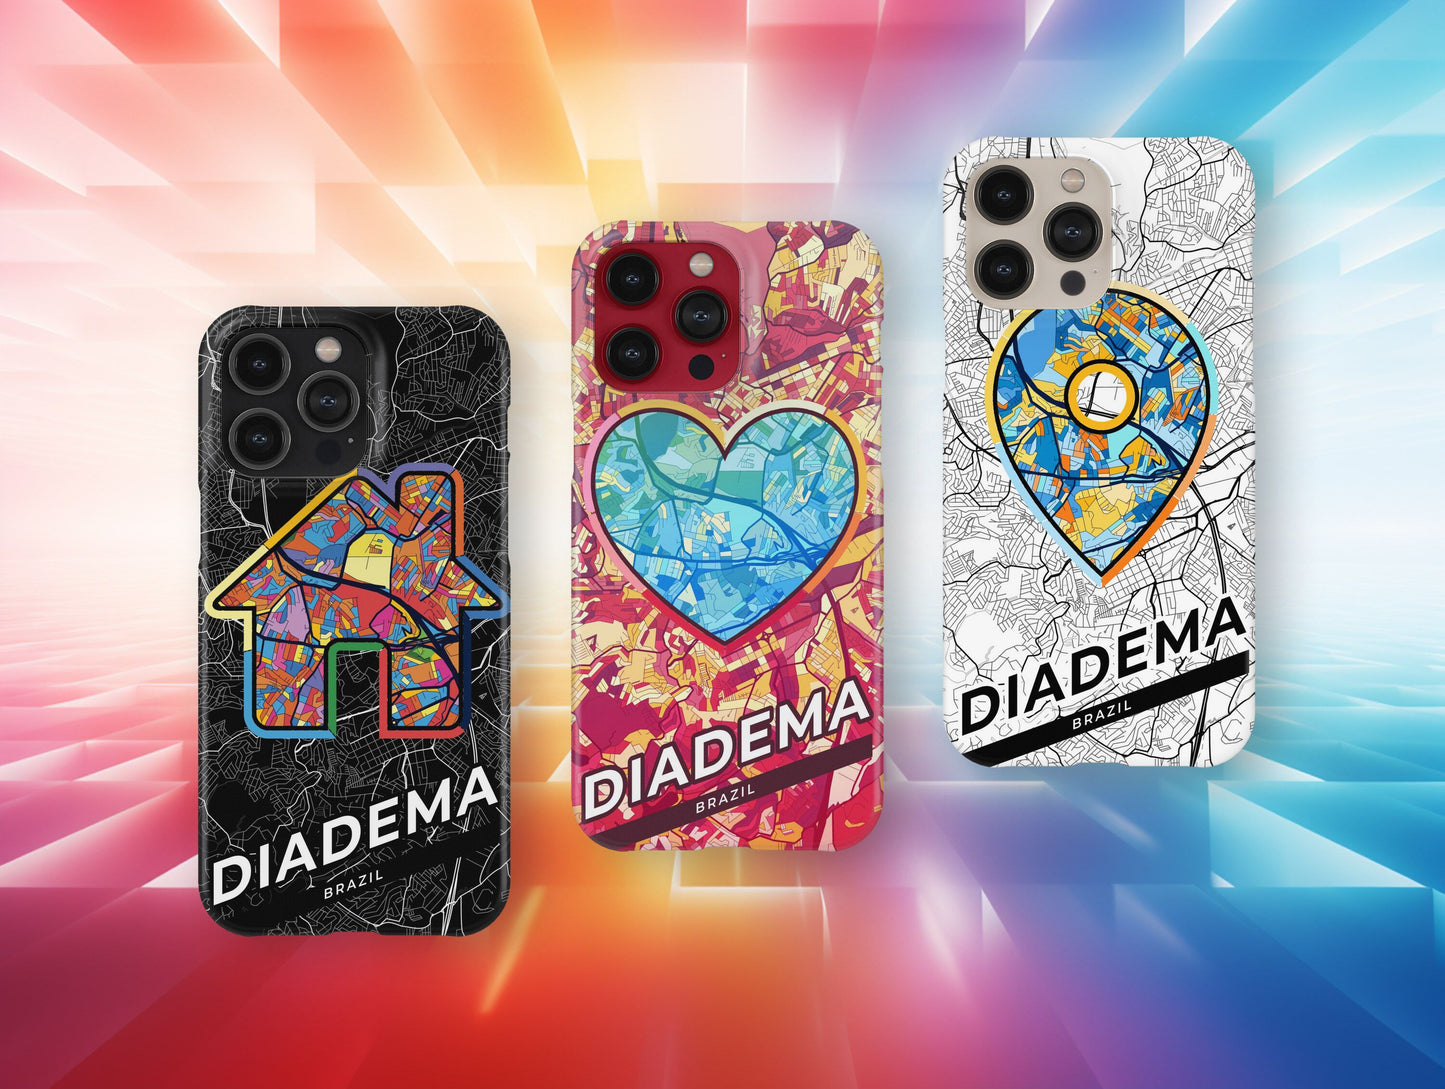 Diadema Brazil slim phone case with colorful icon. Birthday, wedding or housewarming gift. Couple match cases.